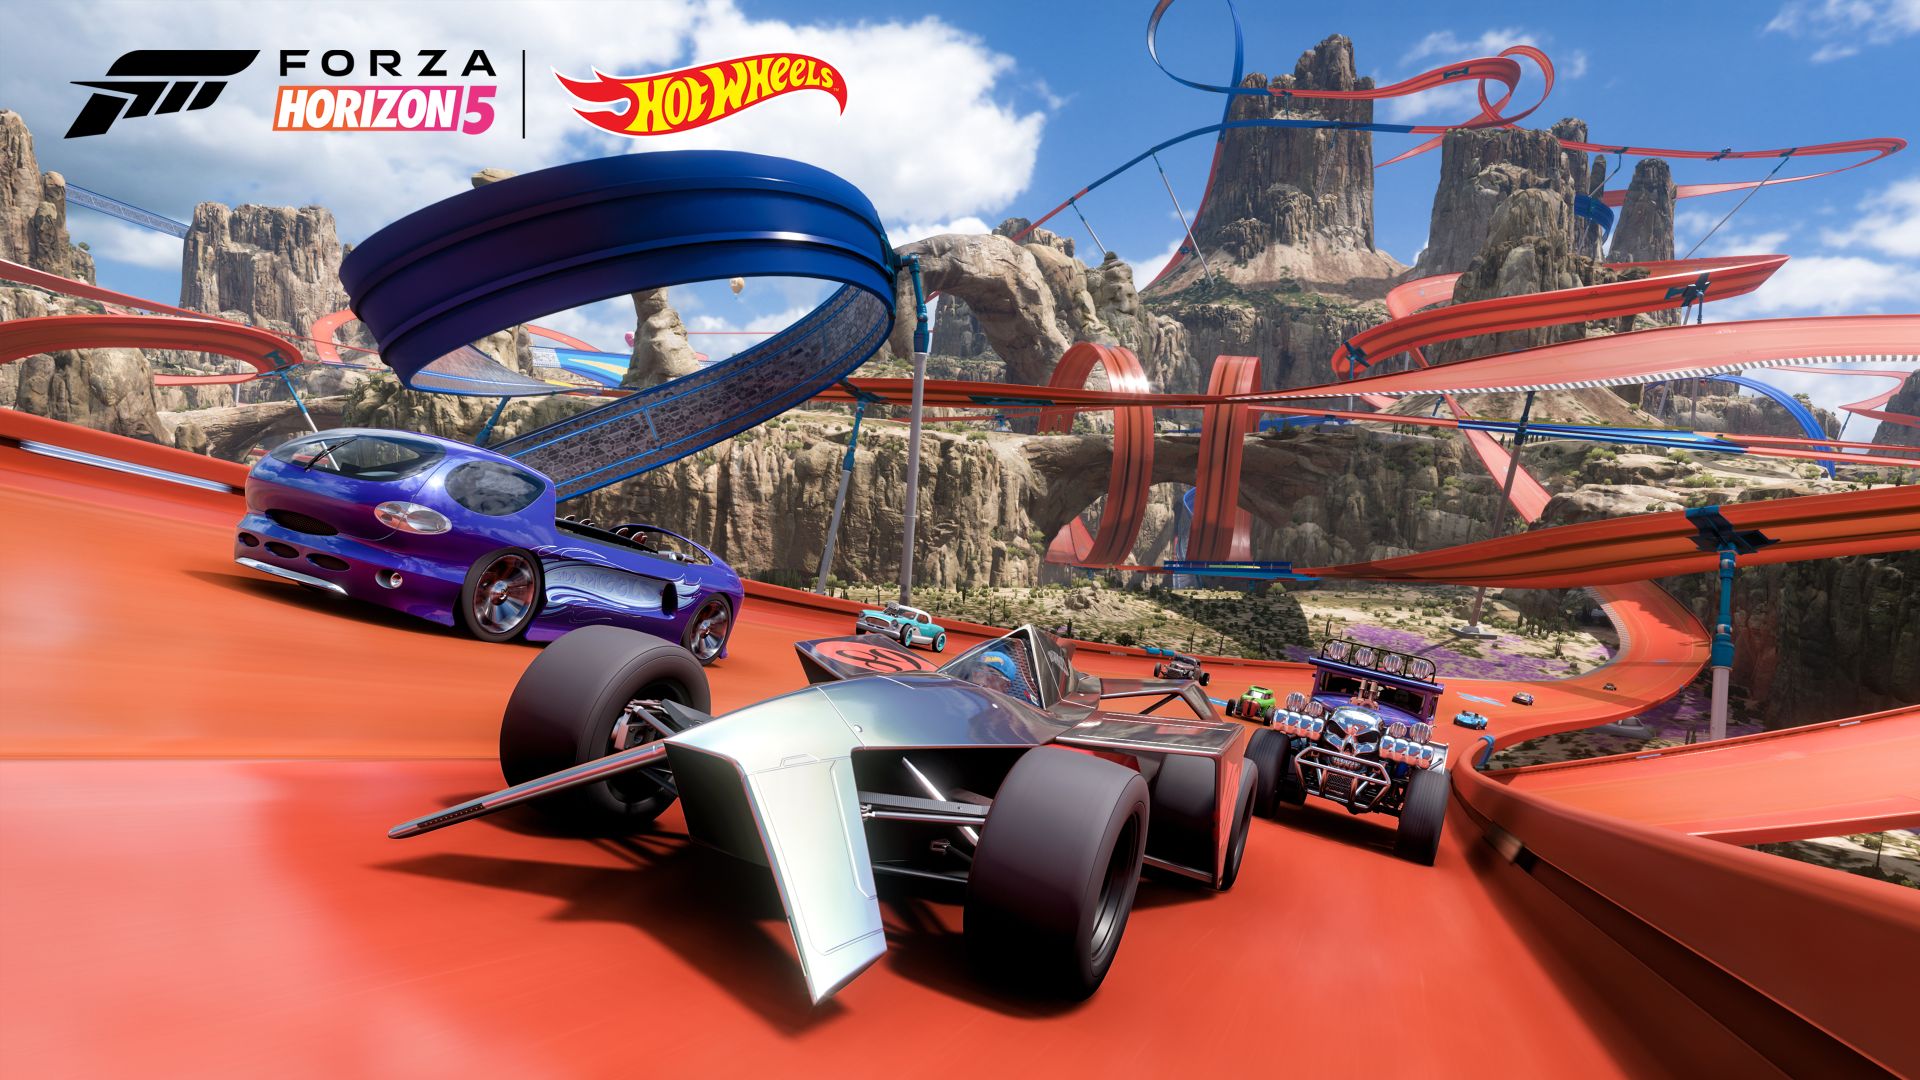 Video For Forza Horizon 5: Hot Wheels is Now Available